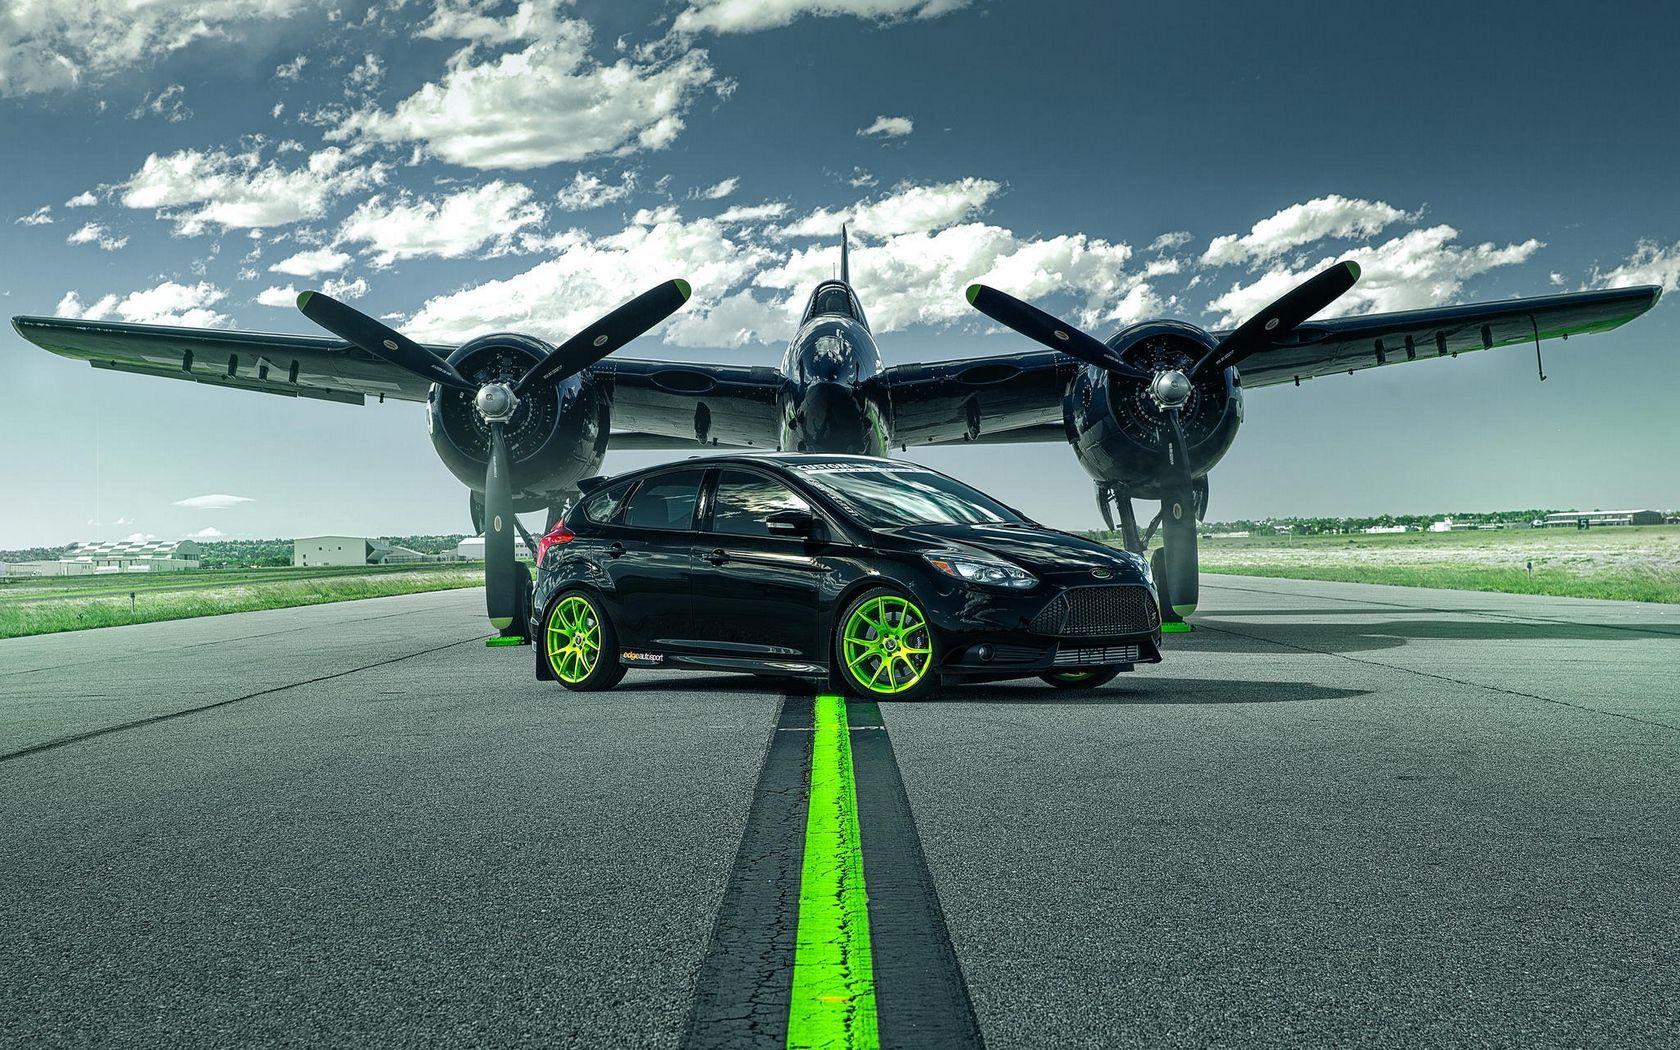 Download wallpapers ford focus, st, ford, plane, runway